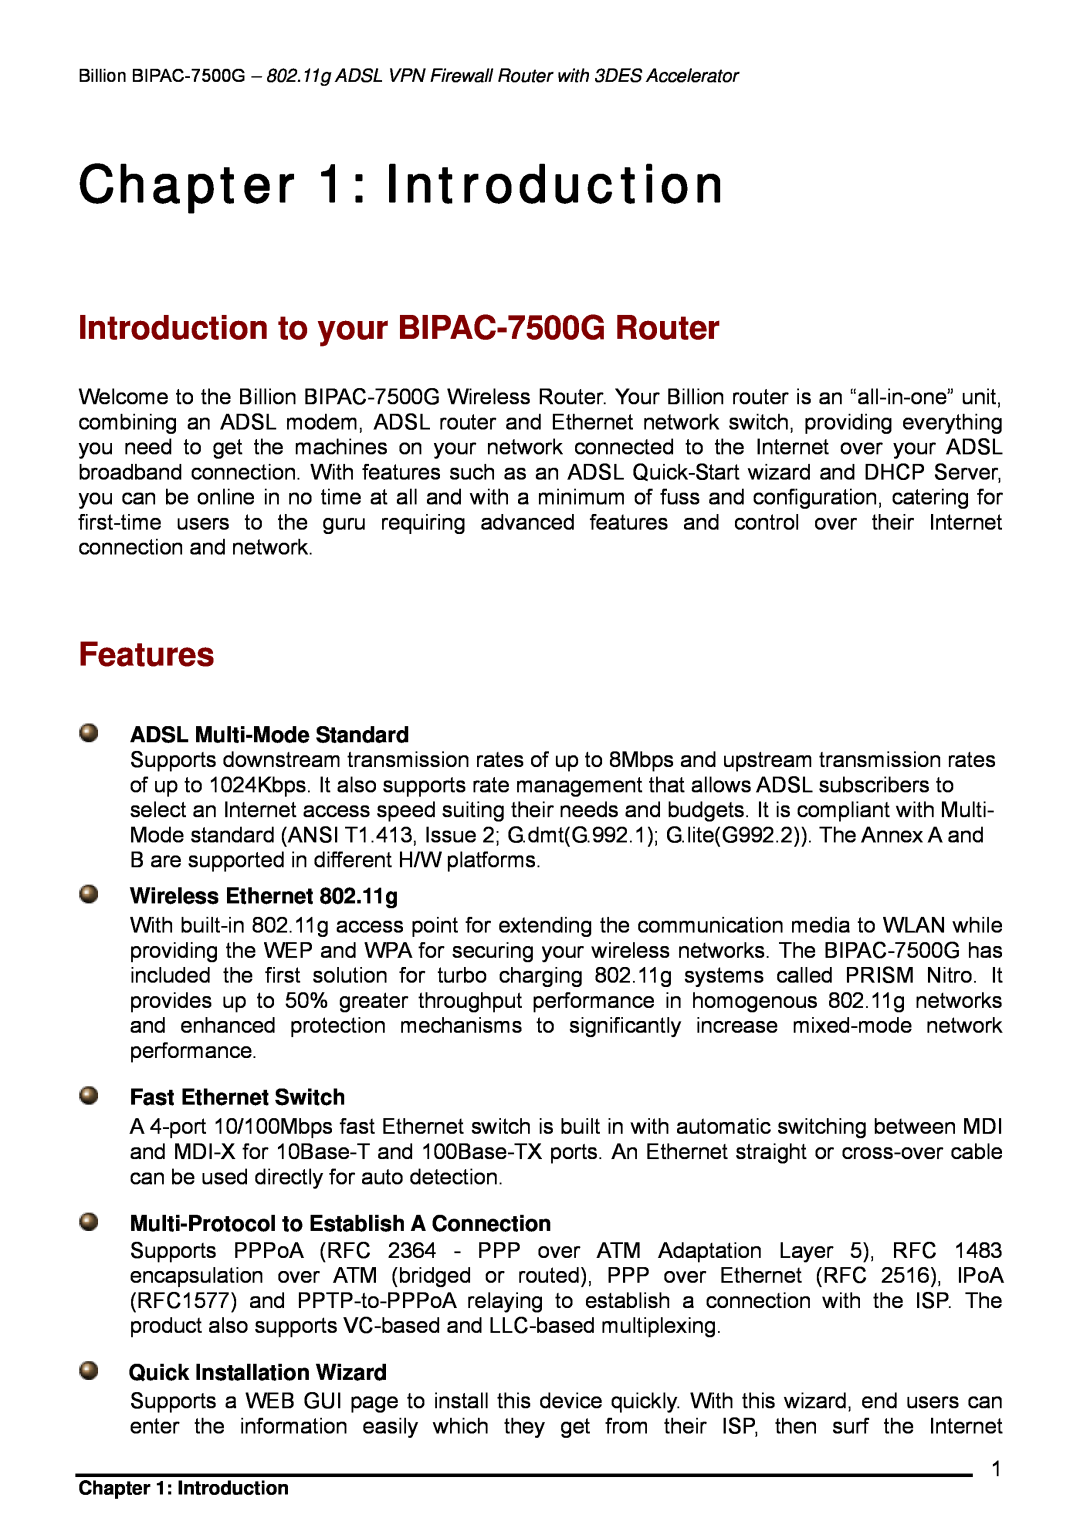 Billion Electric Company user manual Introduction to your BIPAC-7500G Router, Features, ADSL Multi-Mode Standard 